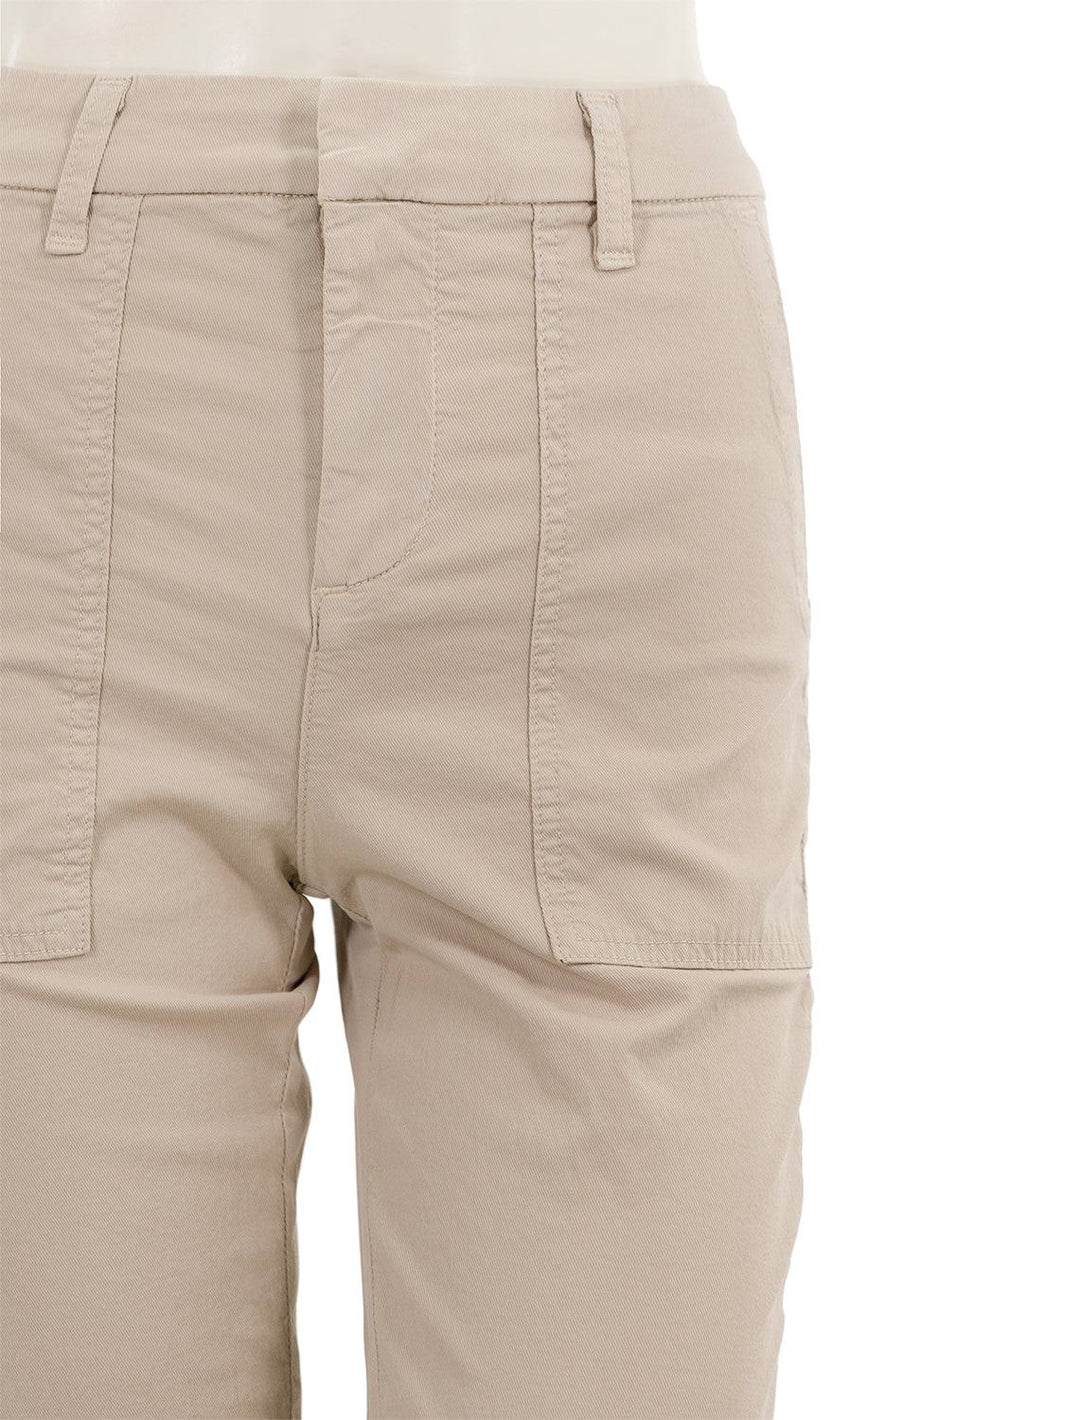 Close-up view of Frank & Eileen's blackstone utility pant in khaki.